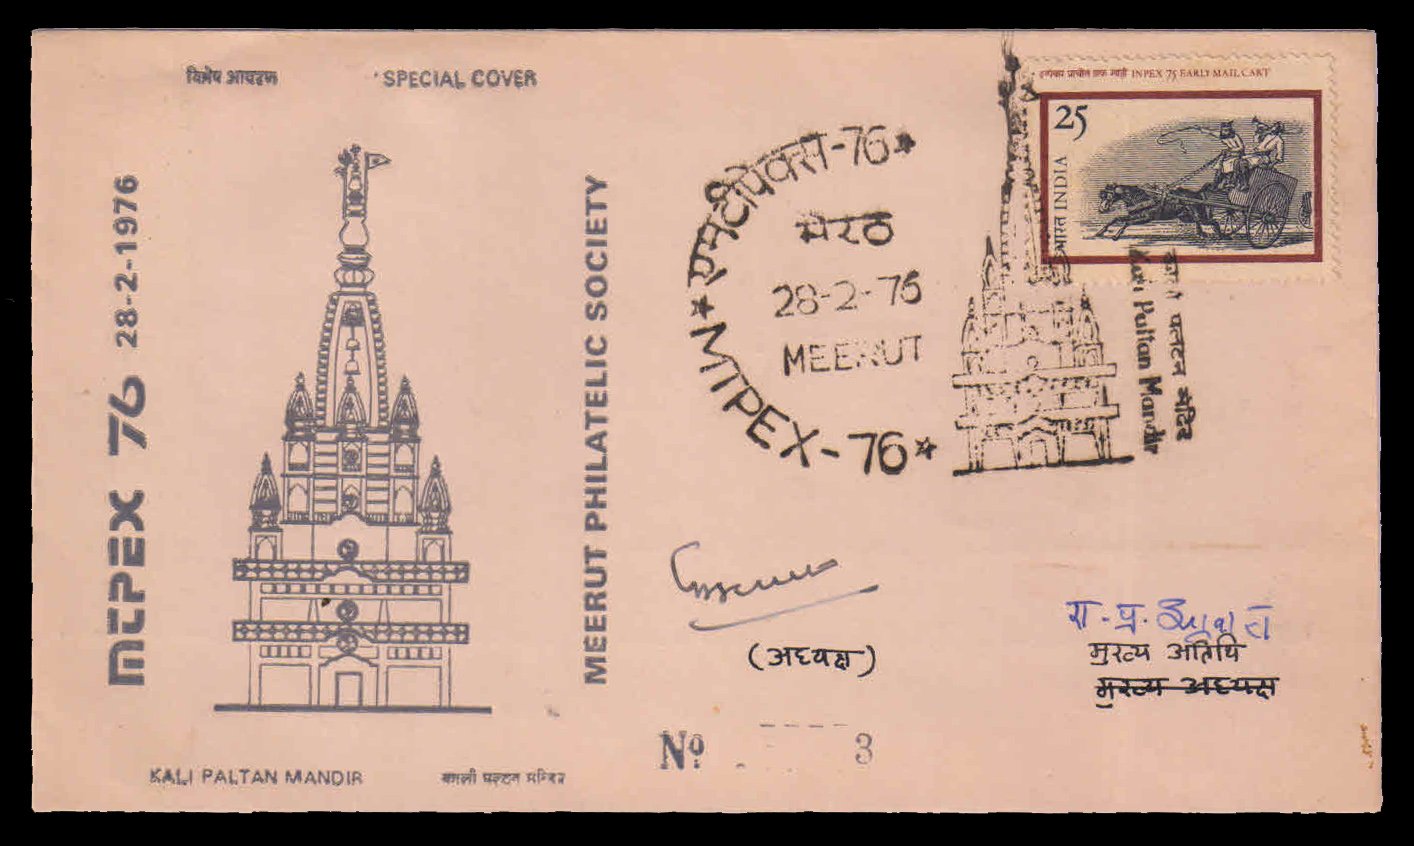 INDIA 28-2-1976, MTPEX 76 Stamp Exhibition, Special Cover, Kali Paltan Mandir with Autograph of Chief Guest and President of Society